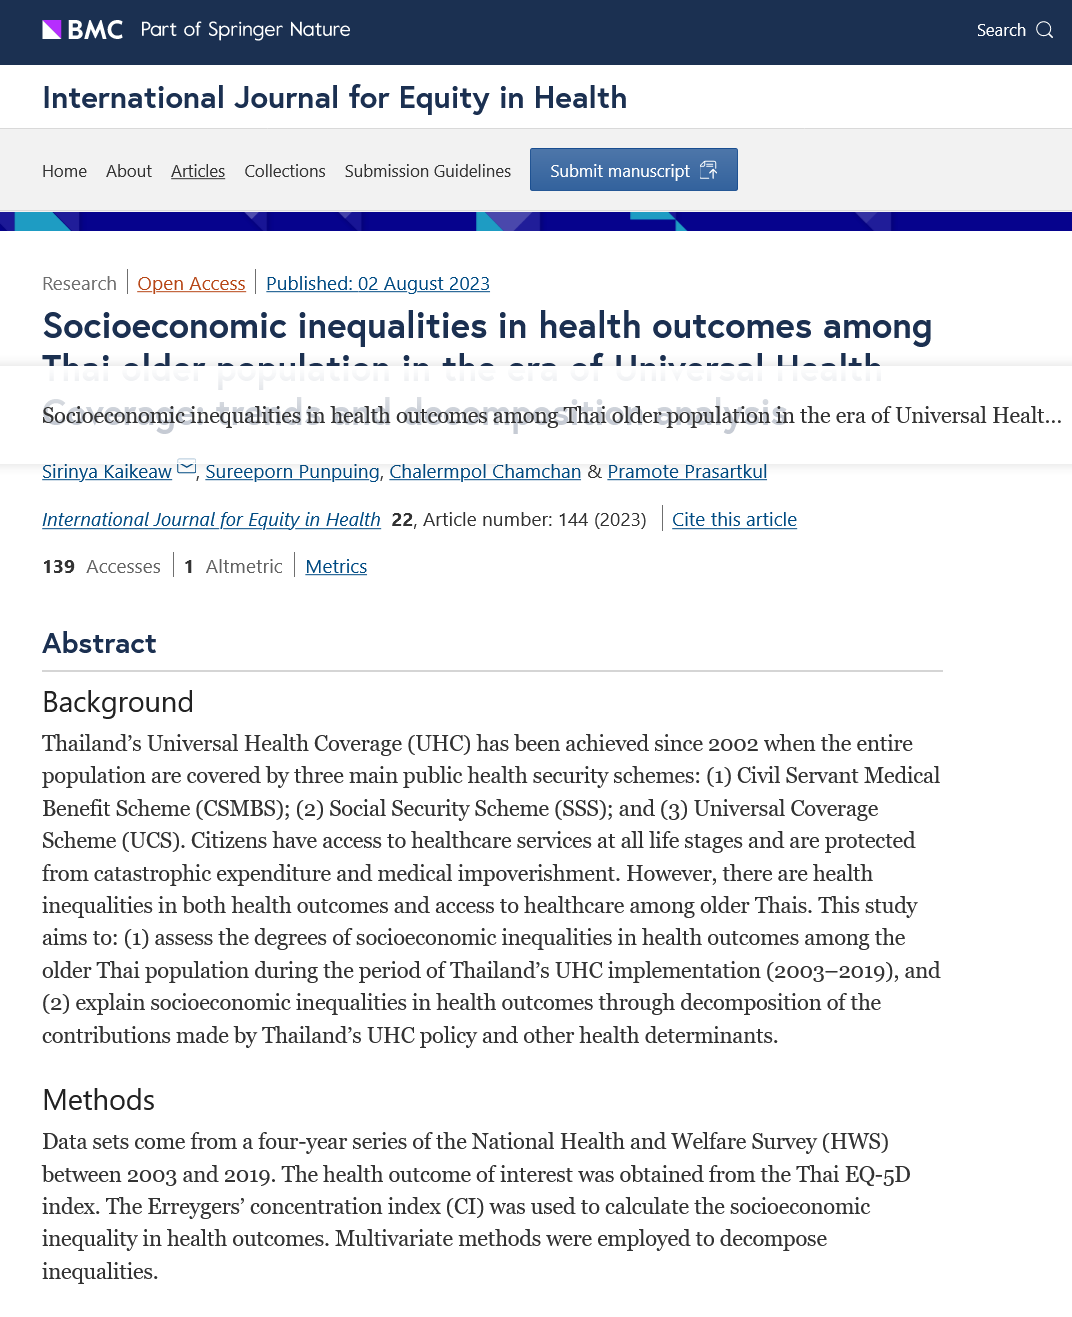 Socioeconomic inequalities in health outcomes among Thai older population in the era of Universal Health Coverage: trends and decomposition analysis